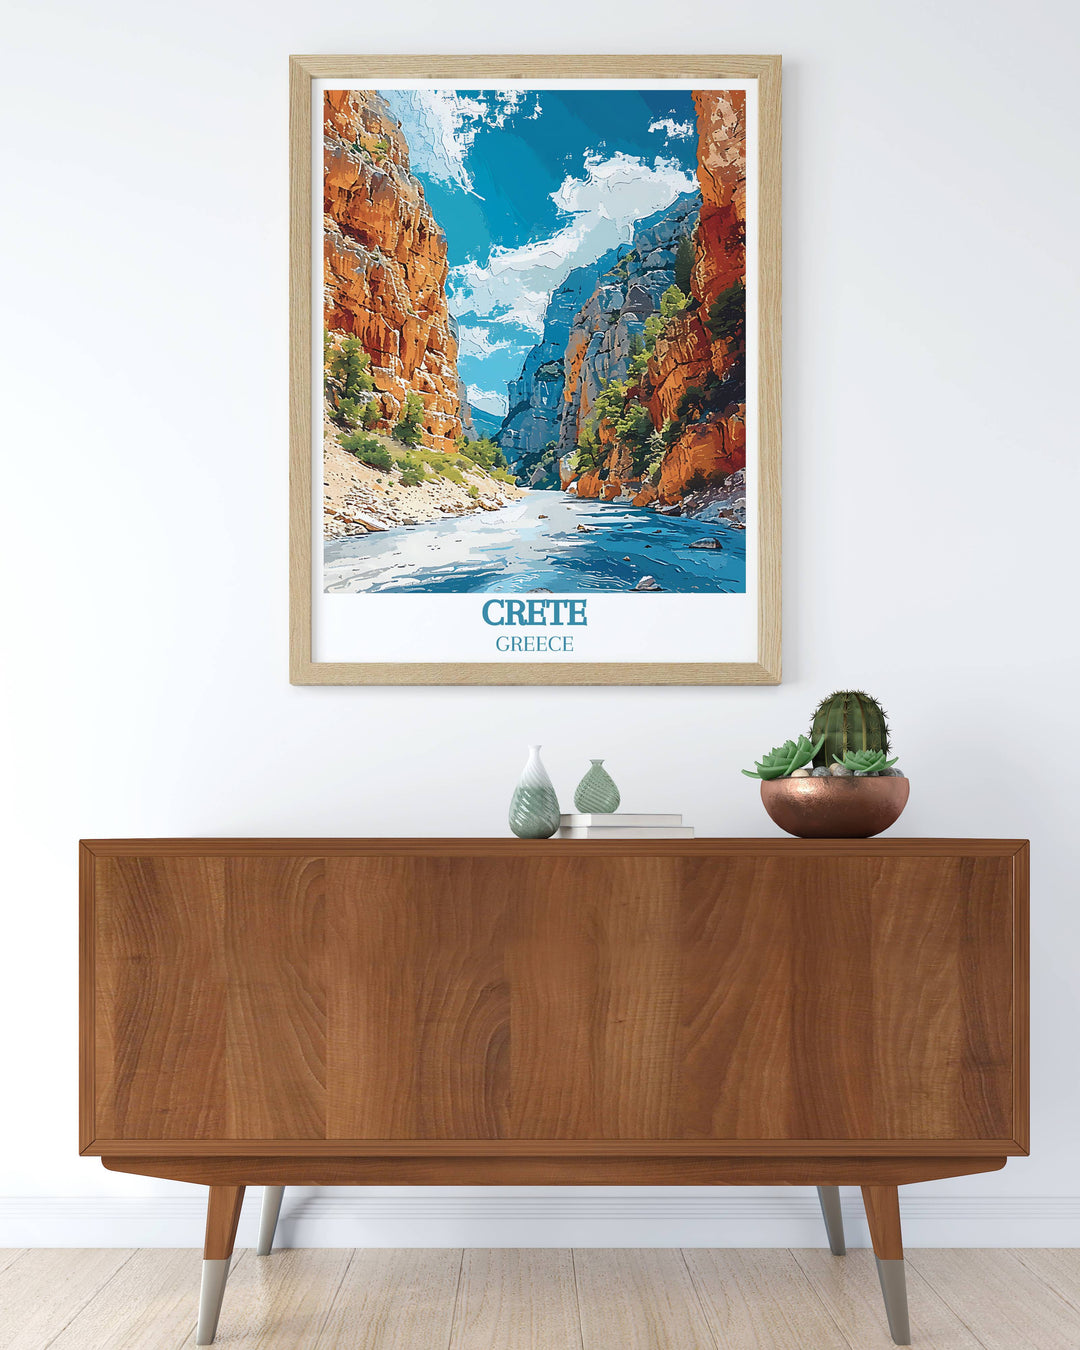 The dynamic landscape of Samaria Gorge, portrayed in a print that showcases the depth and beauty of its towering cliffs and lush vegetation.